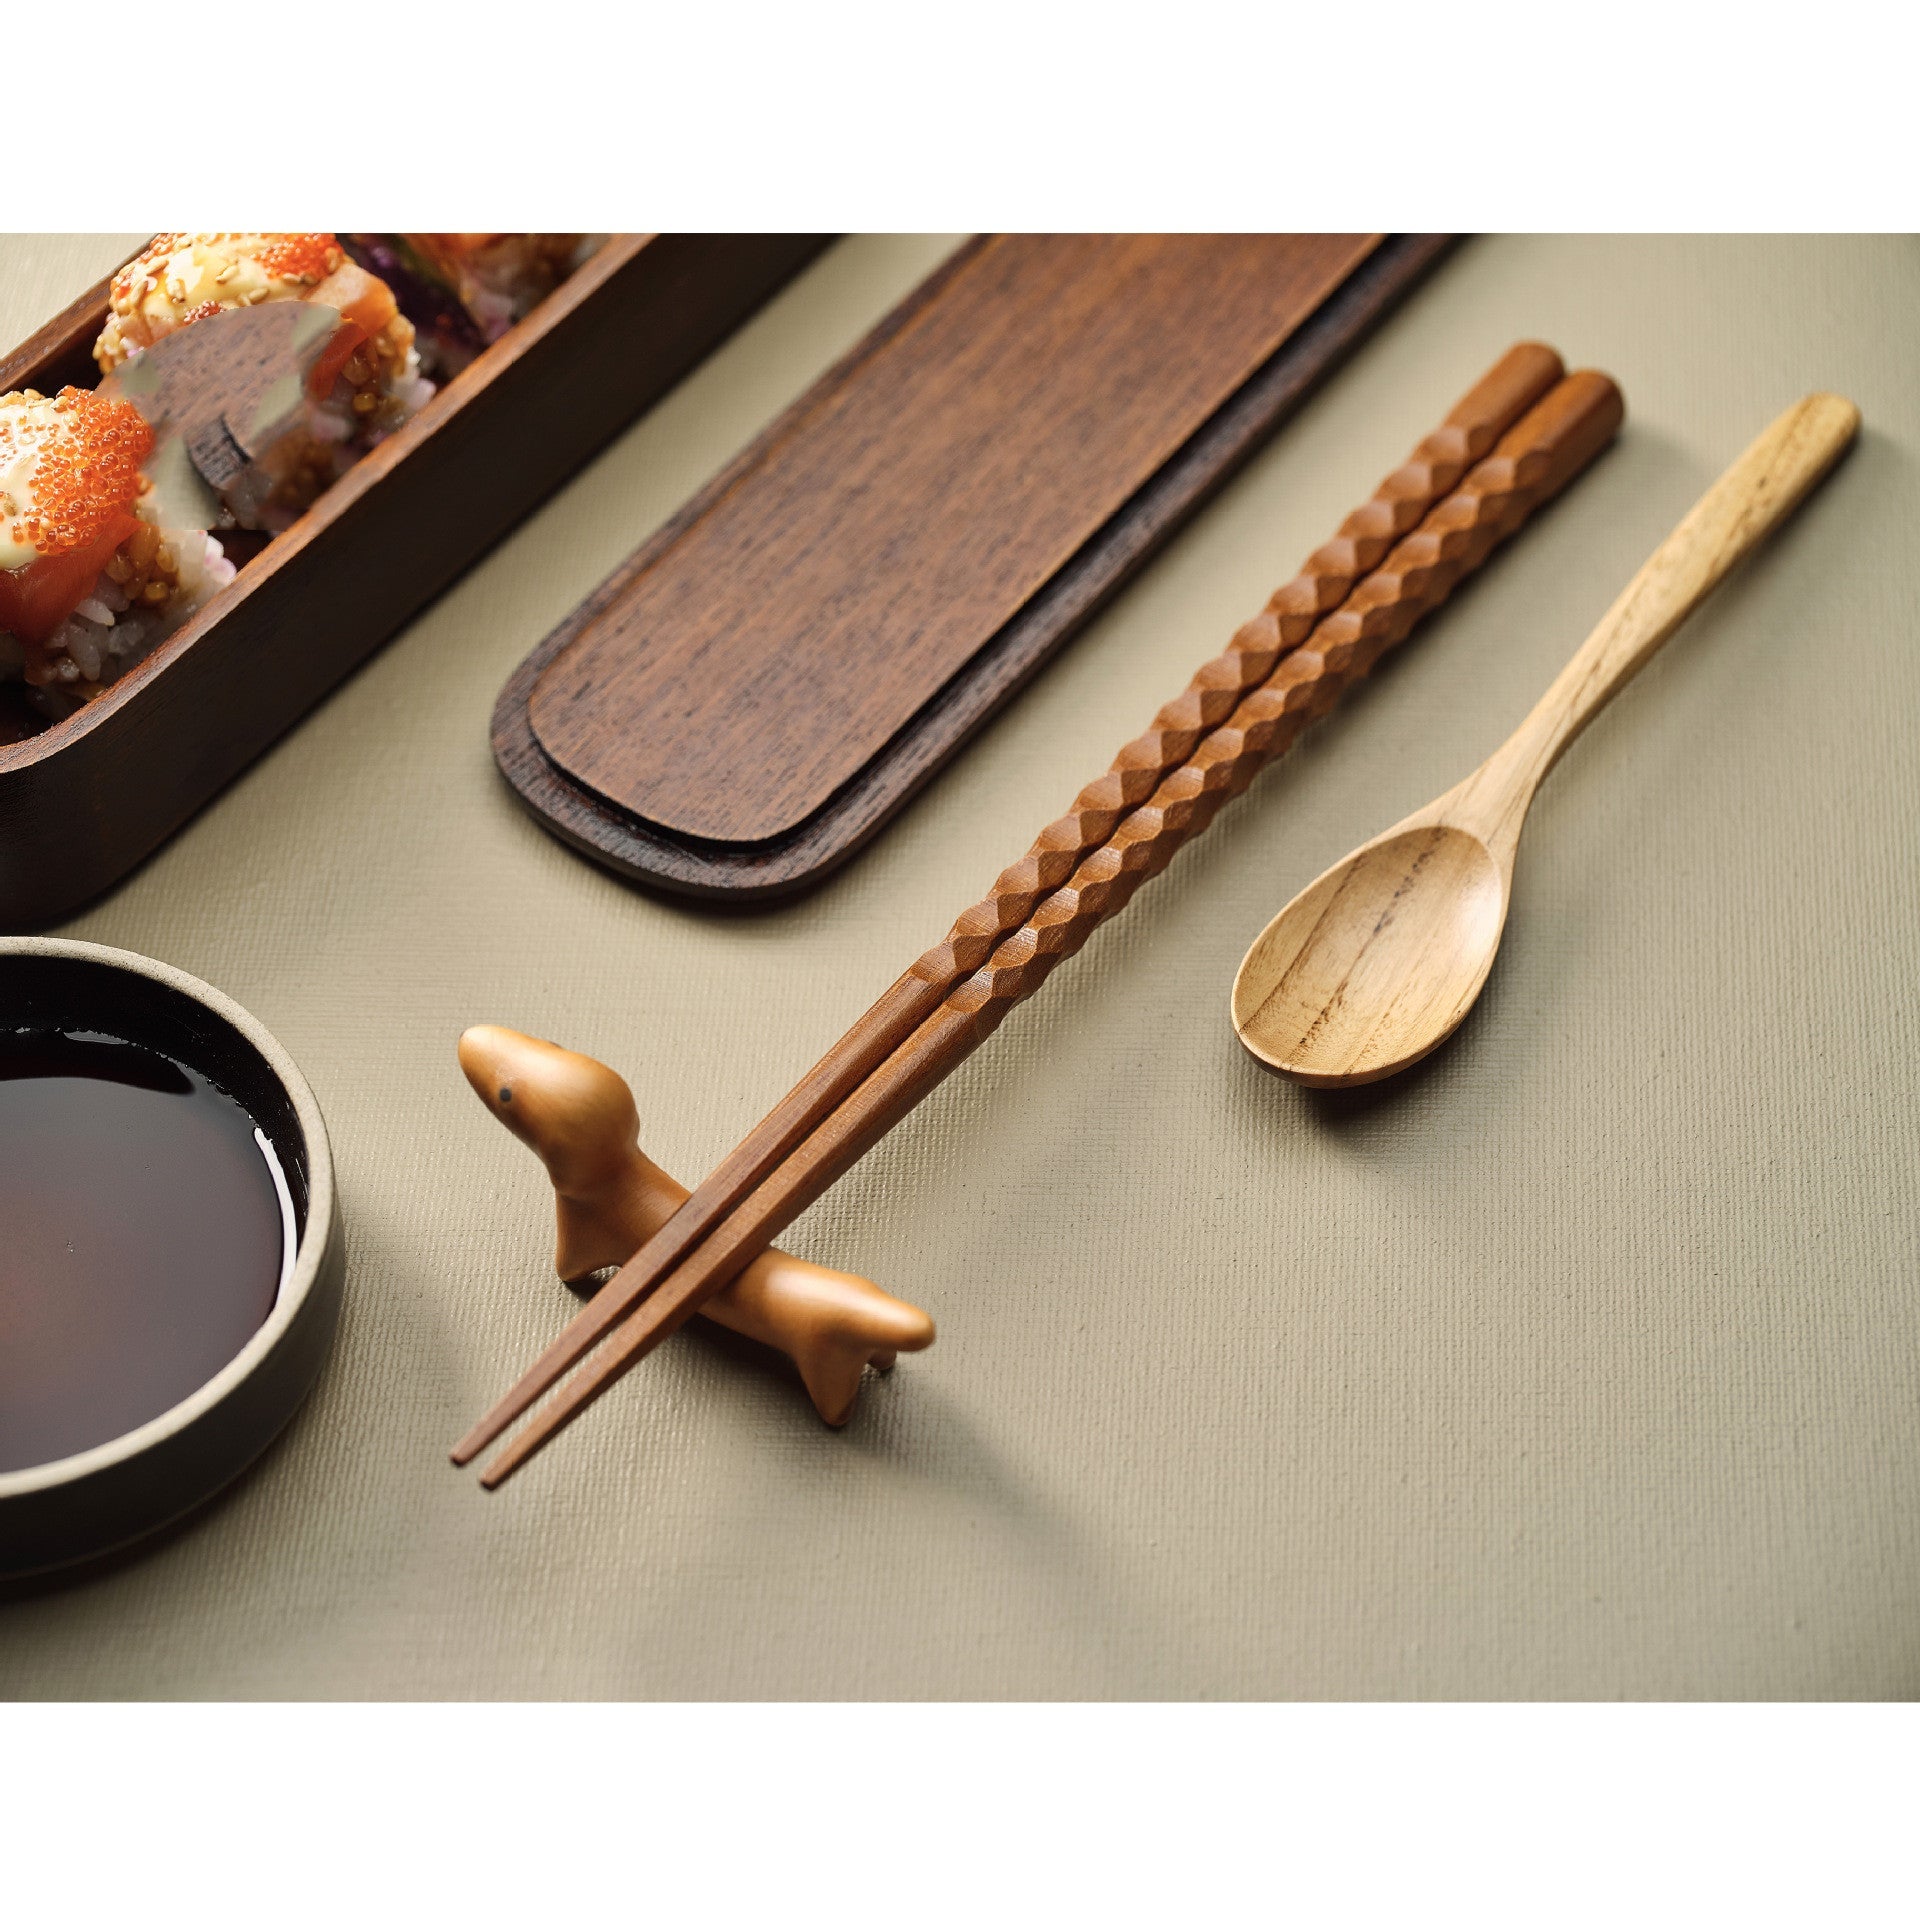 Japanese Wooden Chopsticks With Carvings And Colours | Spoon Set, Natural wooden, Chopsticks, Chopstick Rest - HomeDecor -